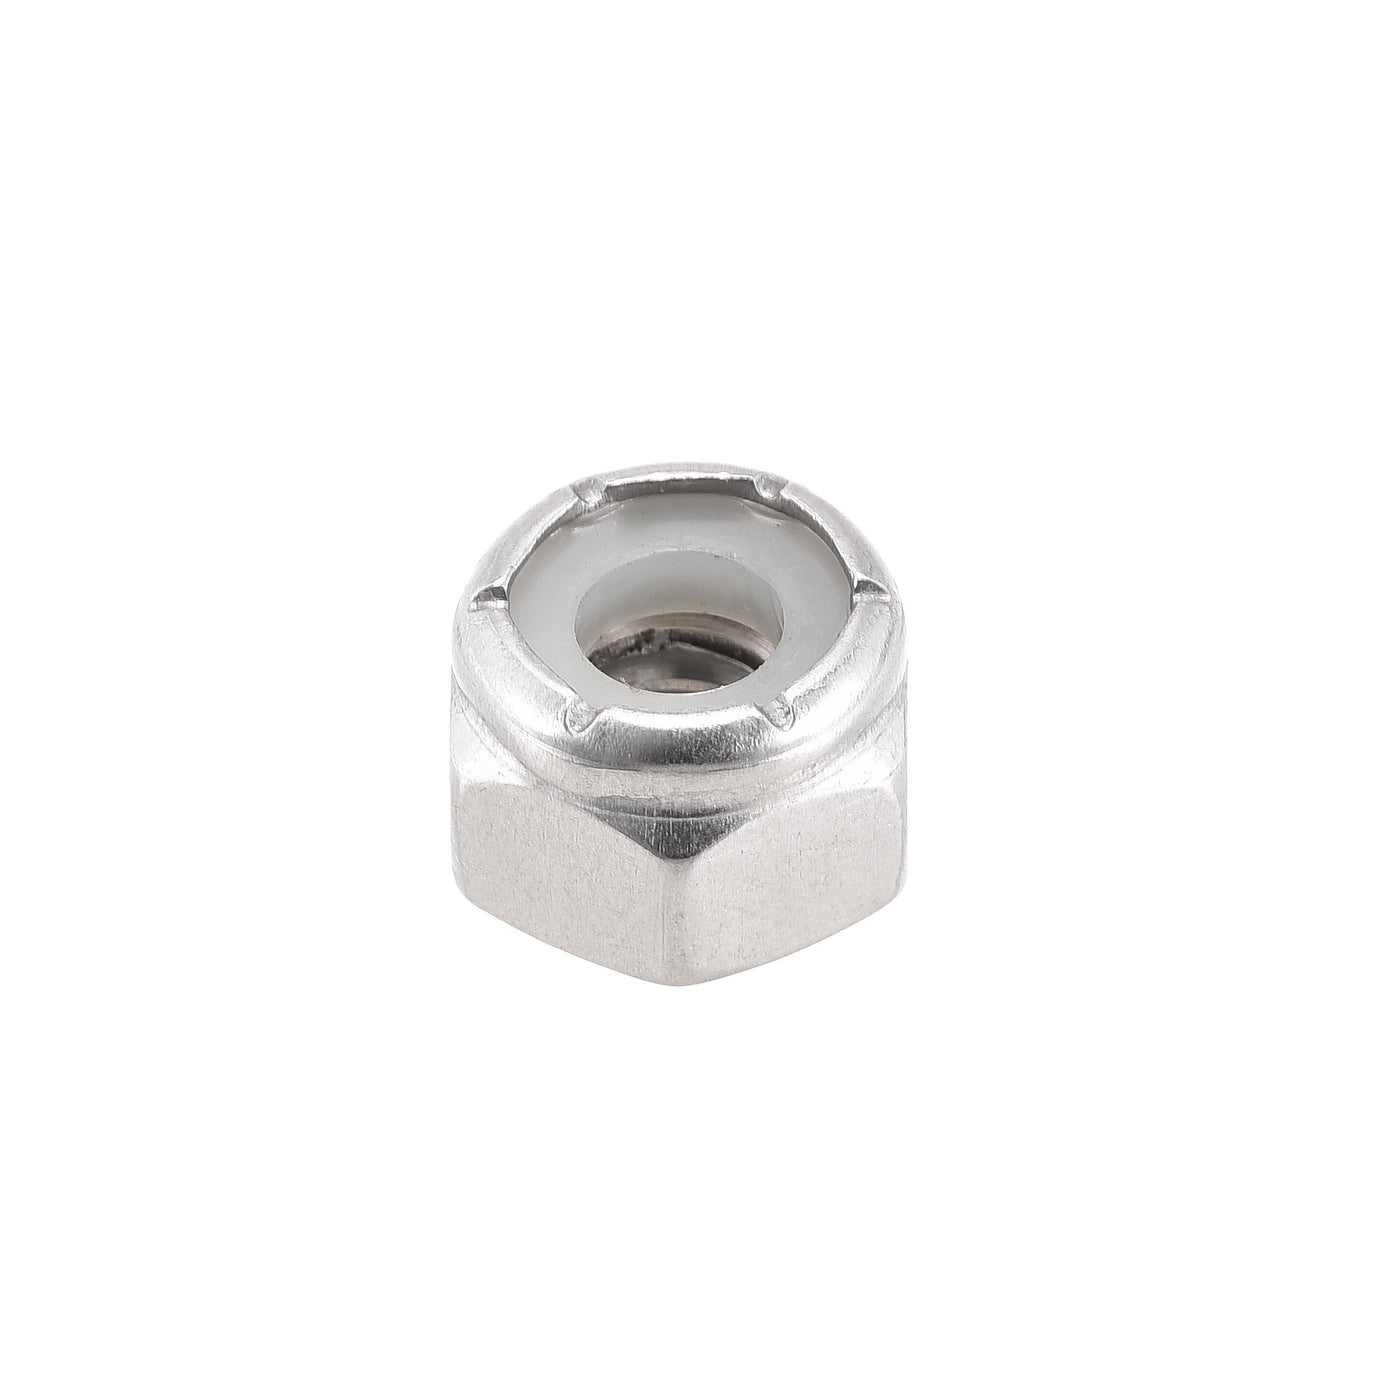 uxcell Uxcell 1/4-20 UNC Nylon Insert Hex Lock Nuts, 304 Stainless Steel, Plain Finish, 100pcs